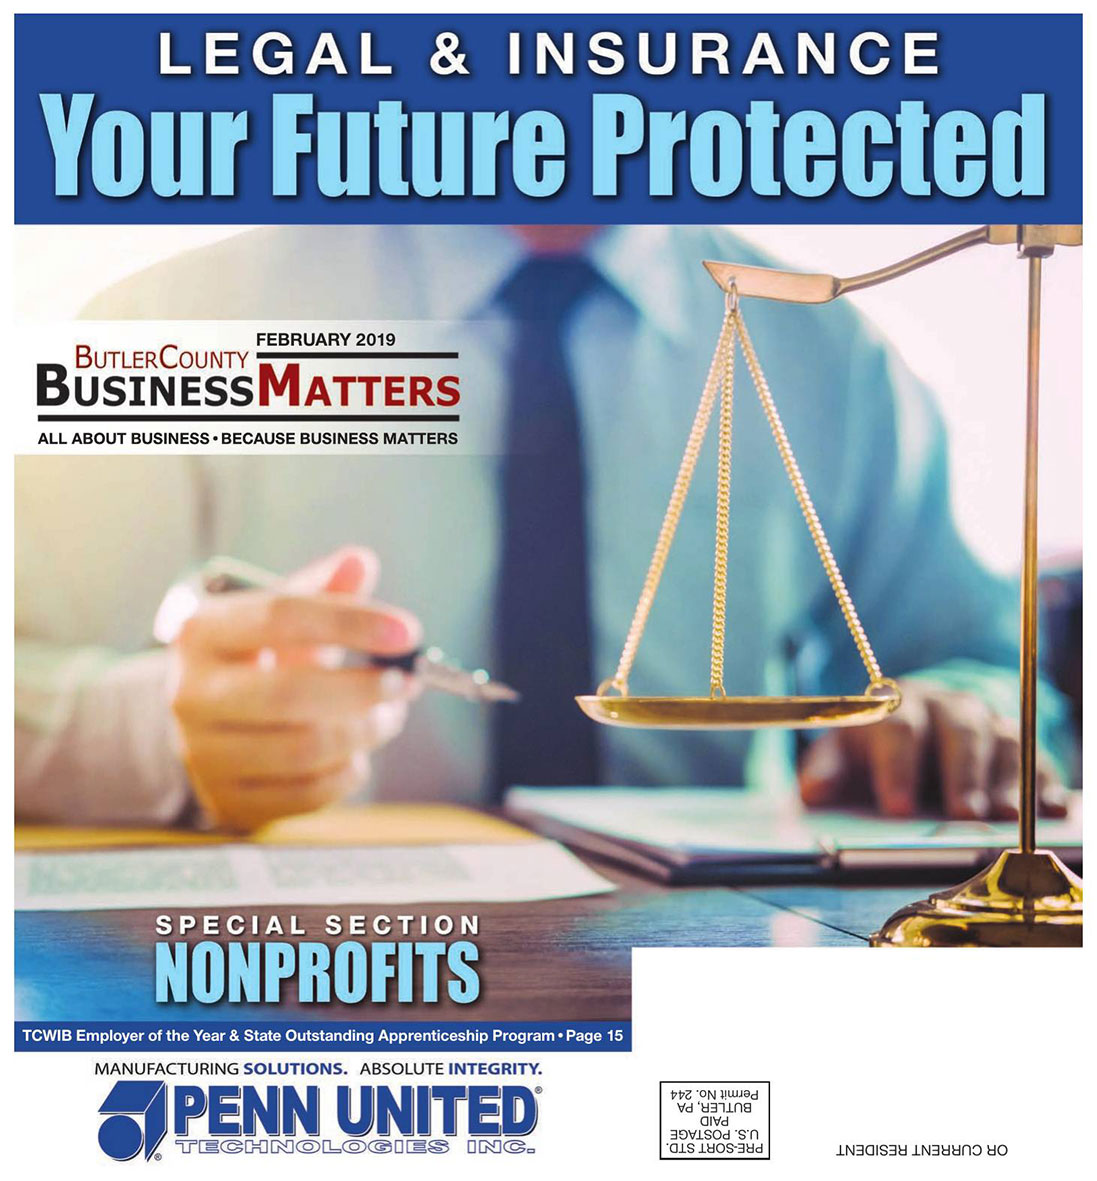 February 2019 - Legal & Insurance - Your Future Protected